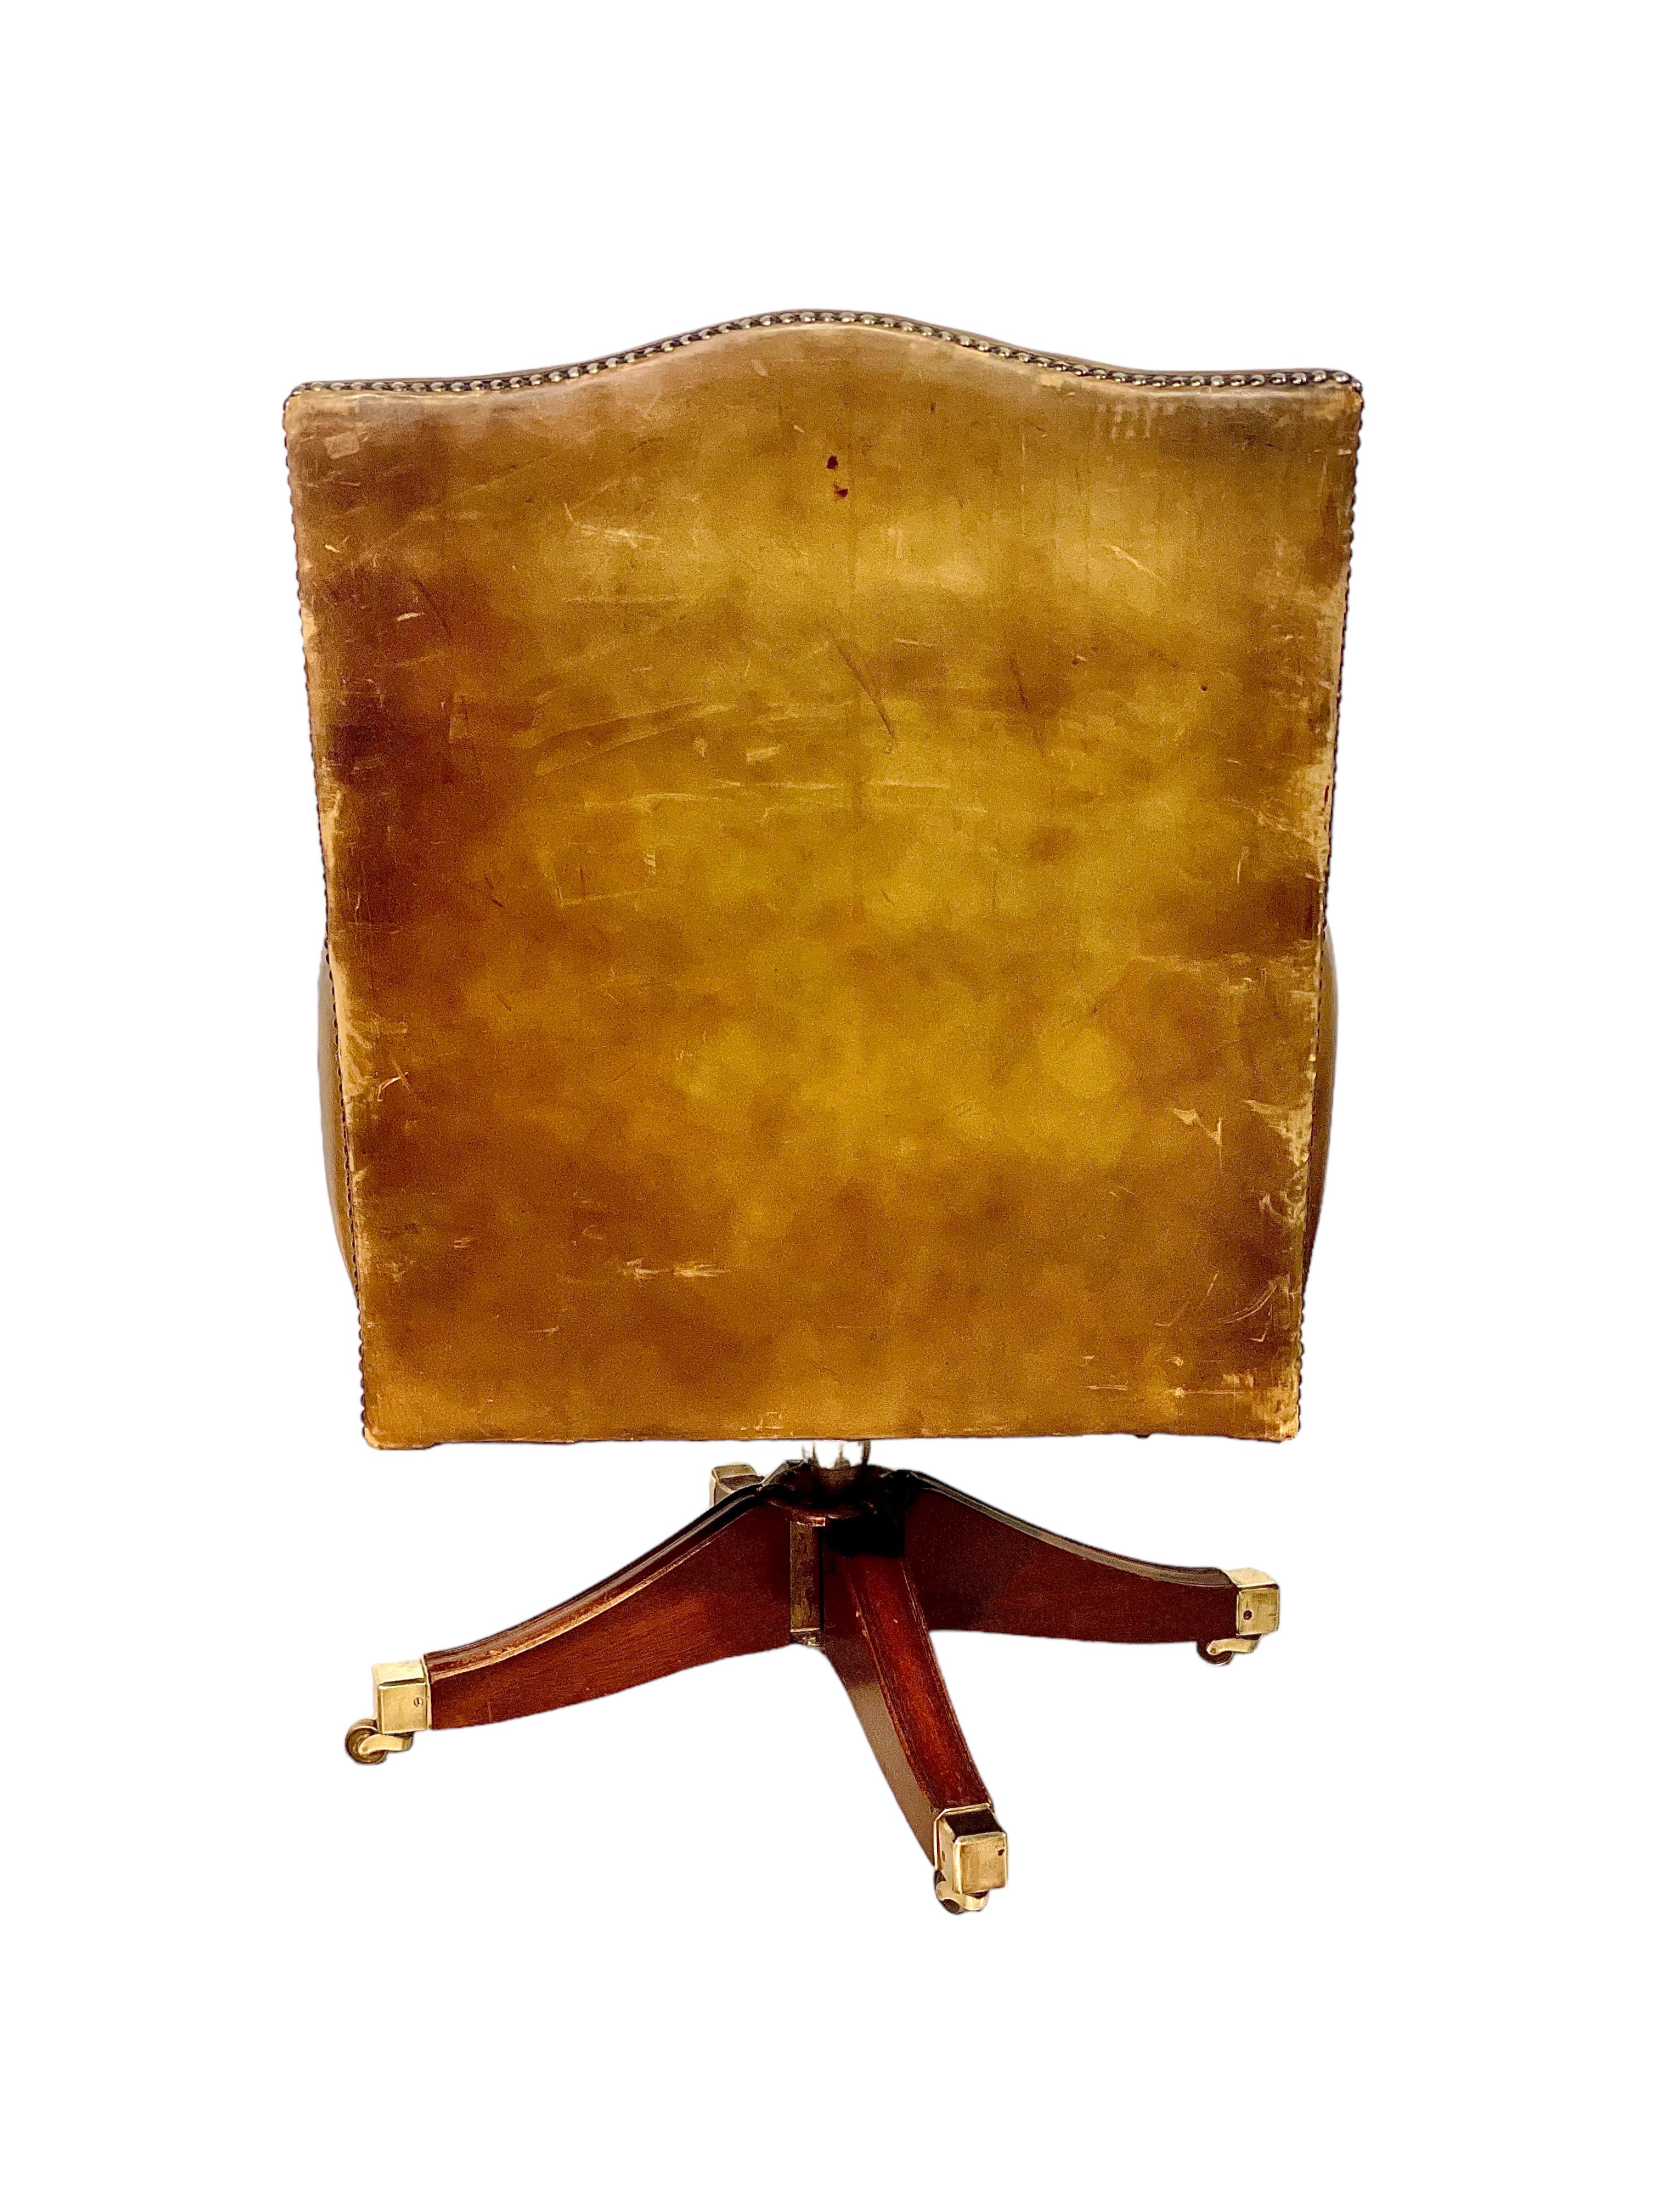 French Vintage Revolving Leather Desk's Bergere Chair For Sale